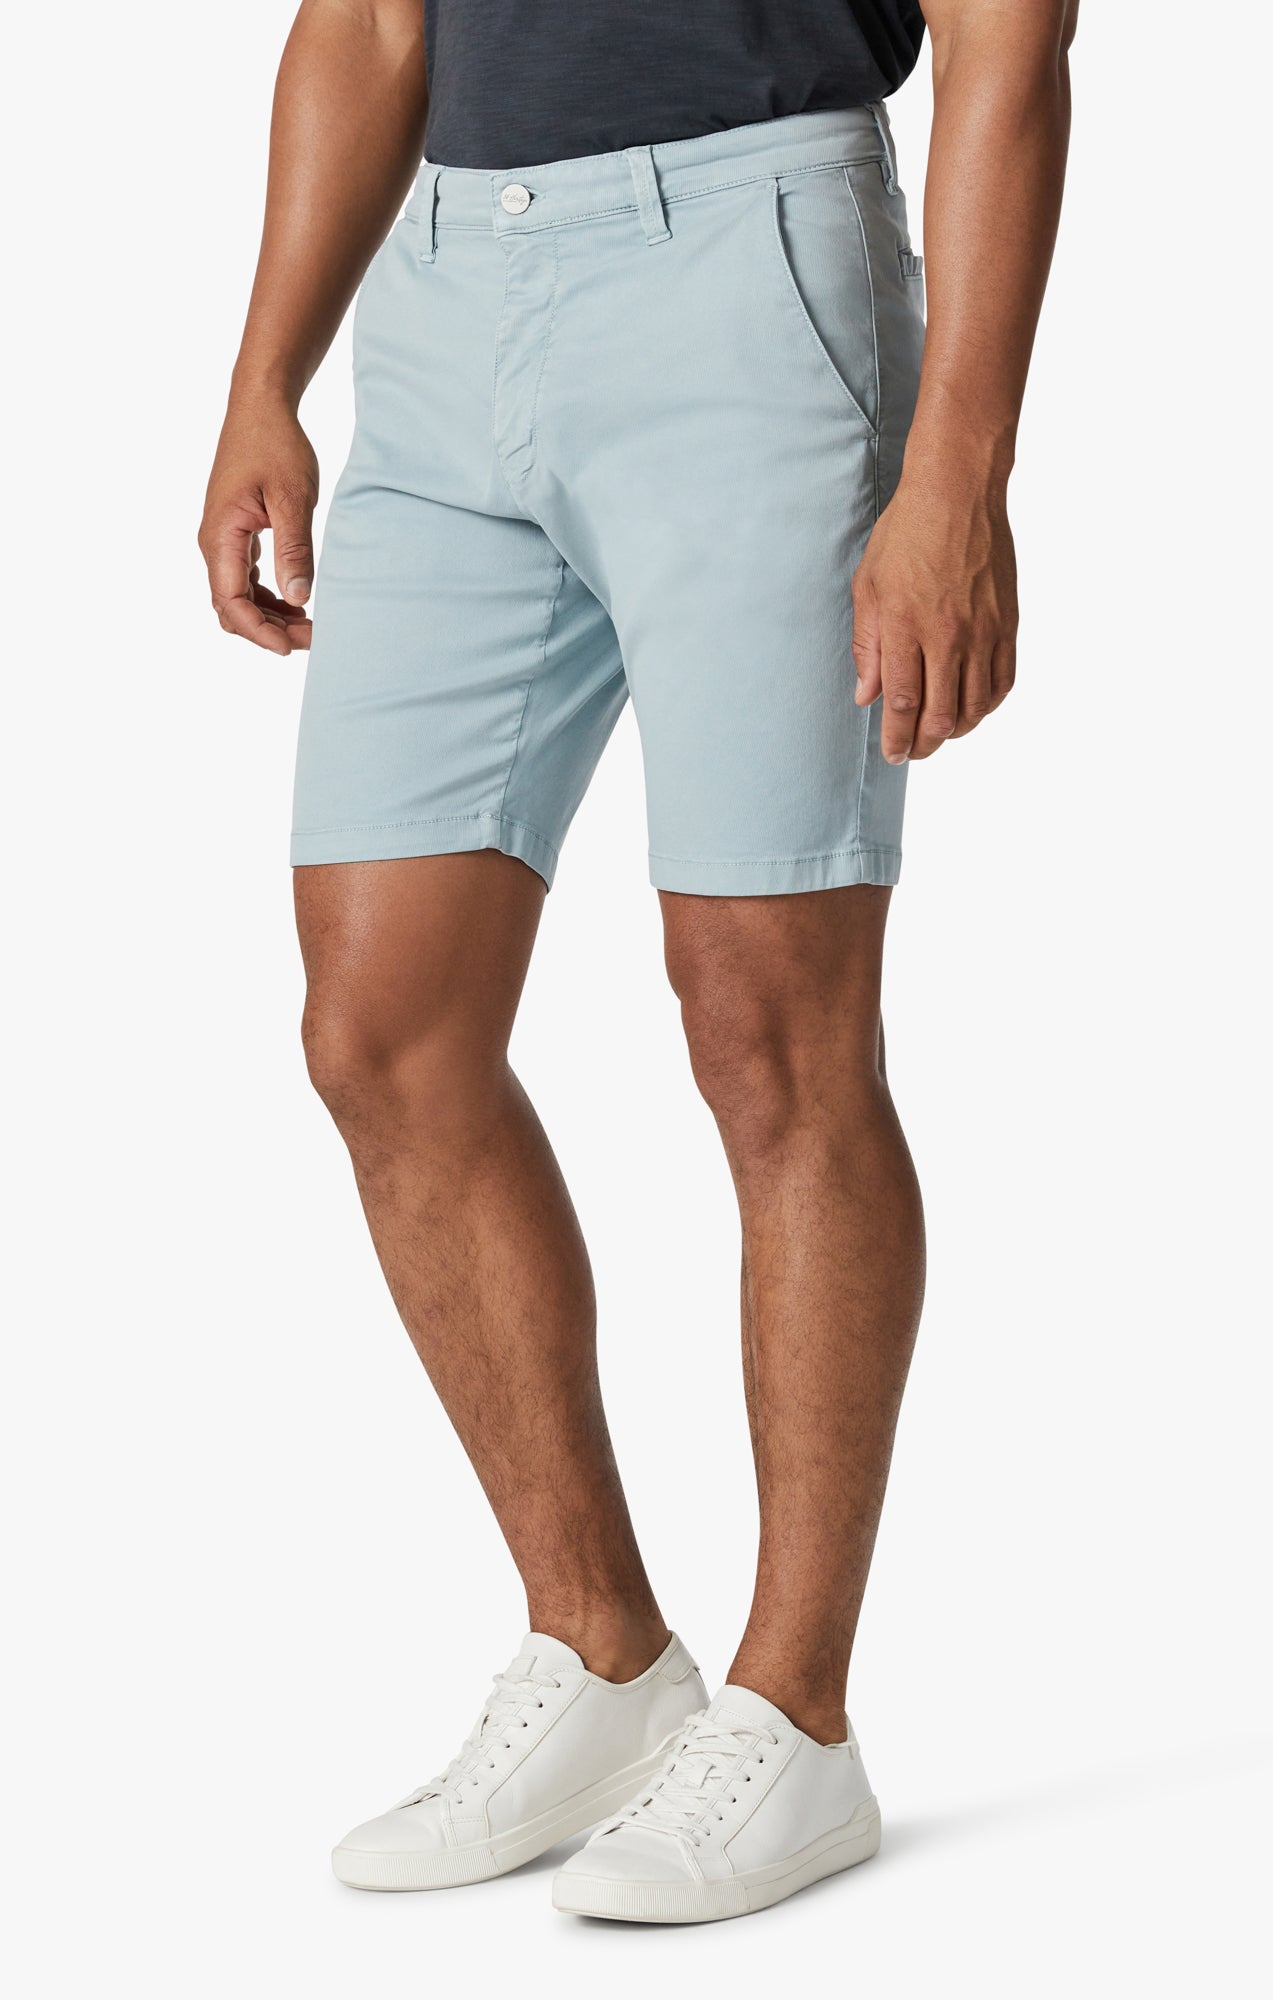 Arizona Shorts In Light Blue Soft Touch Image 4